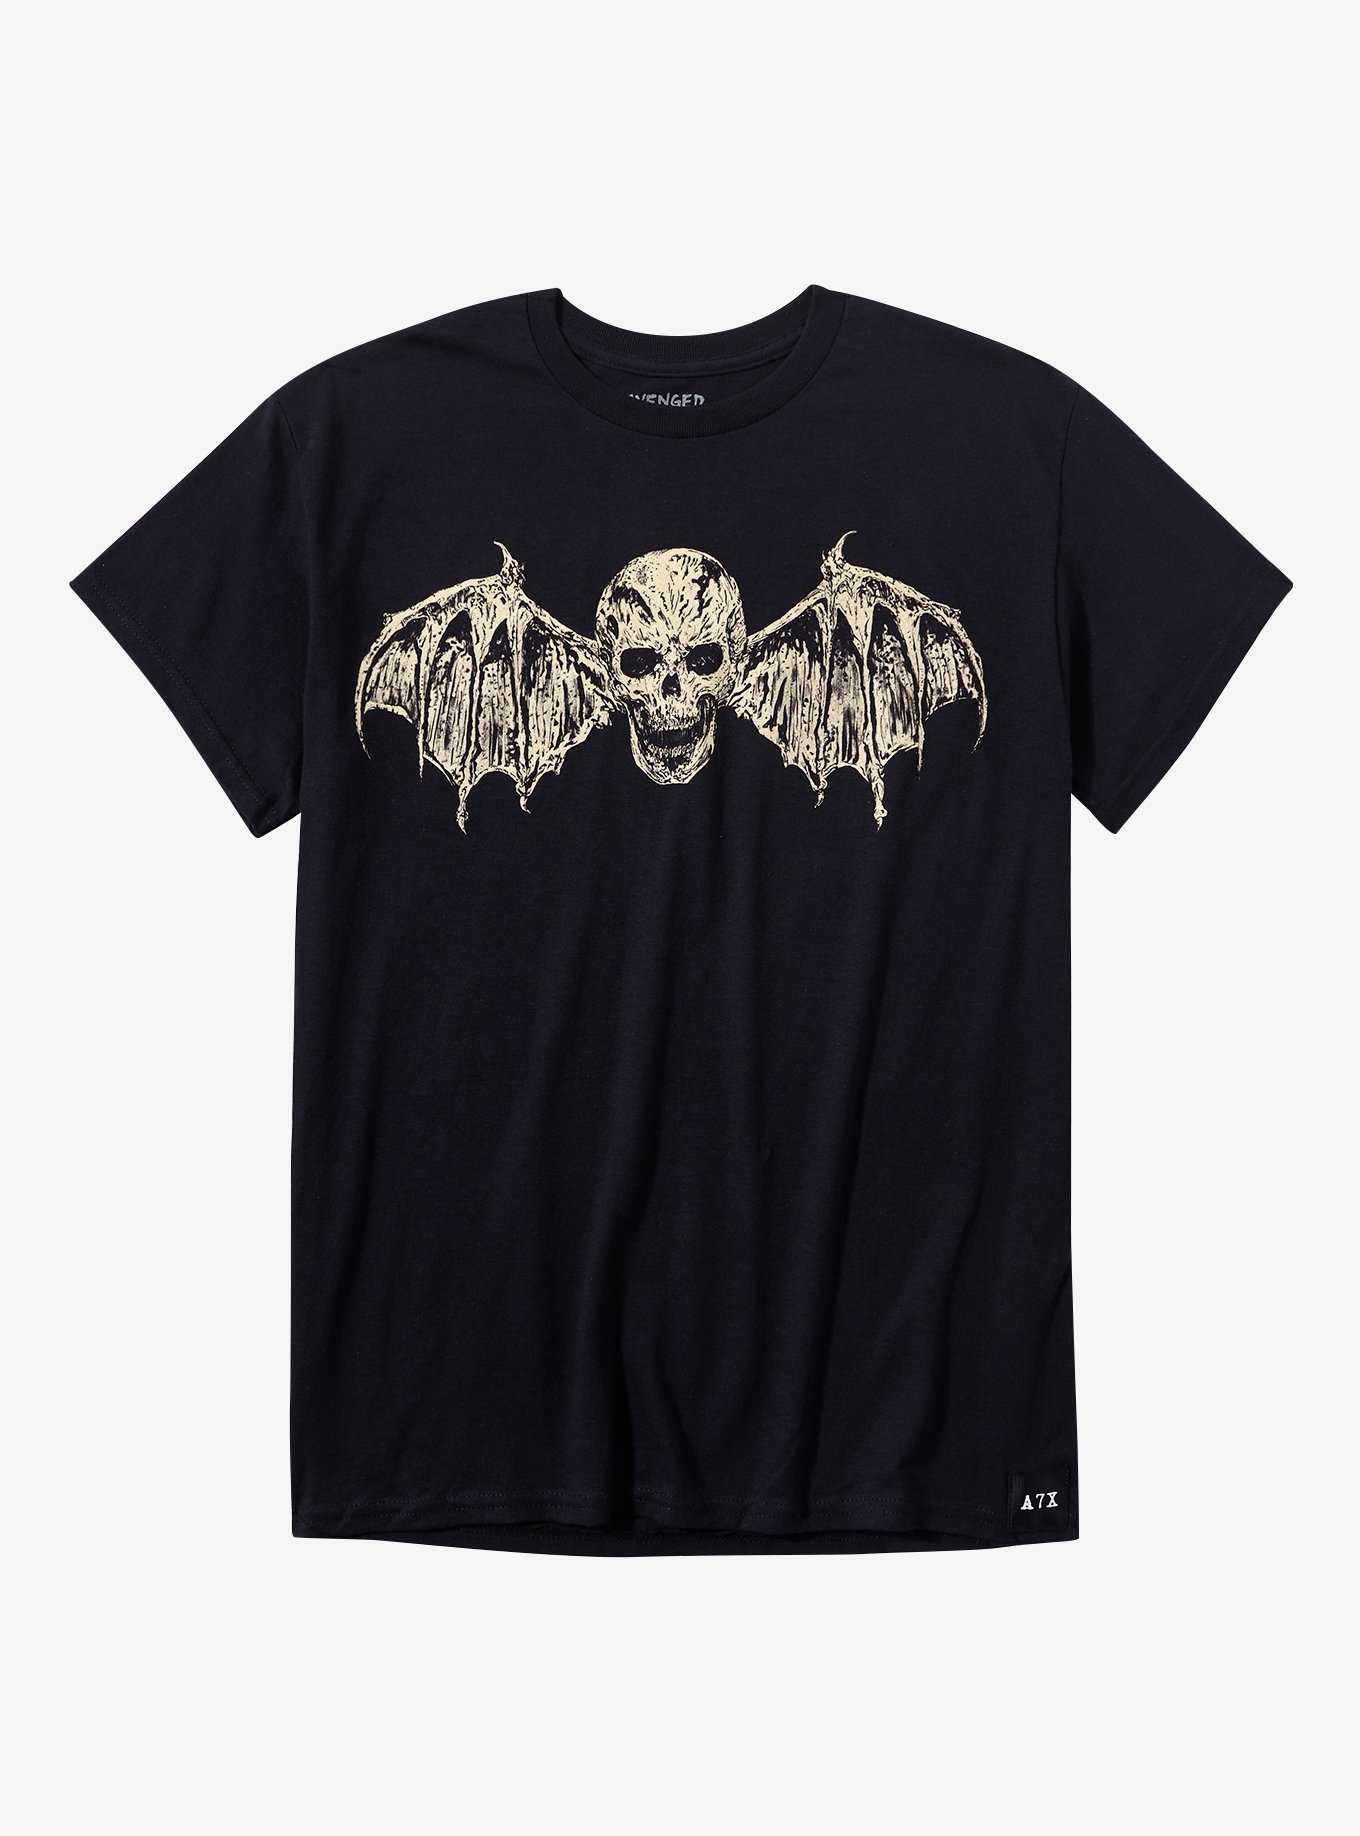 Avenged Sevenfold North American Tour 2023 T-Shirt Hot Topic Exclusive, , hi-res